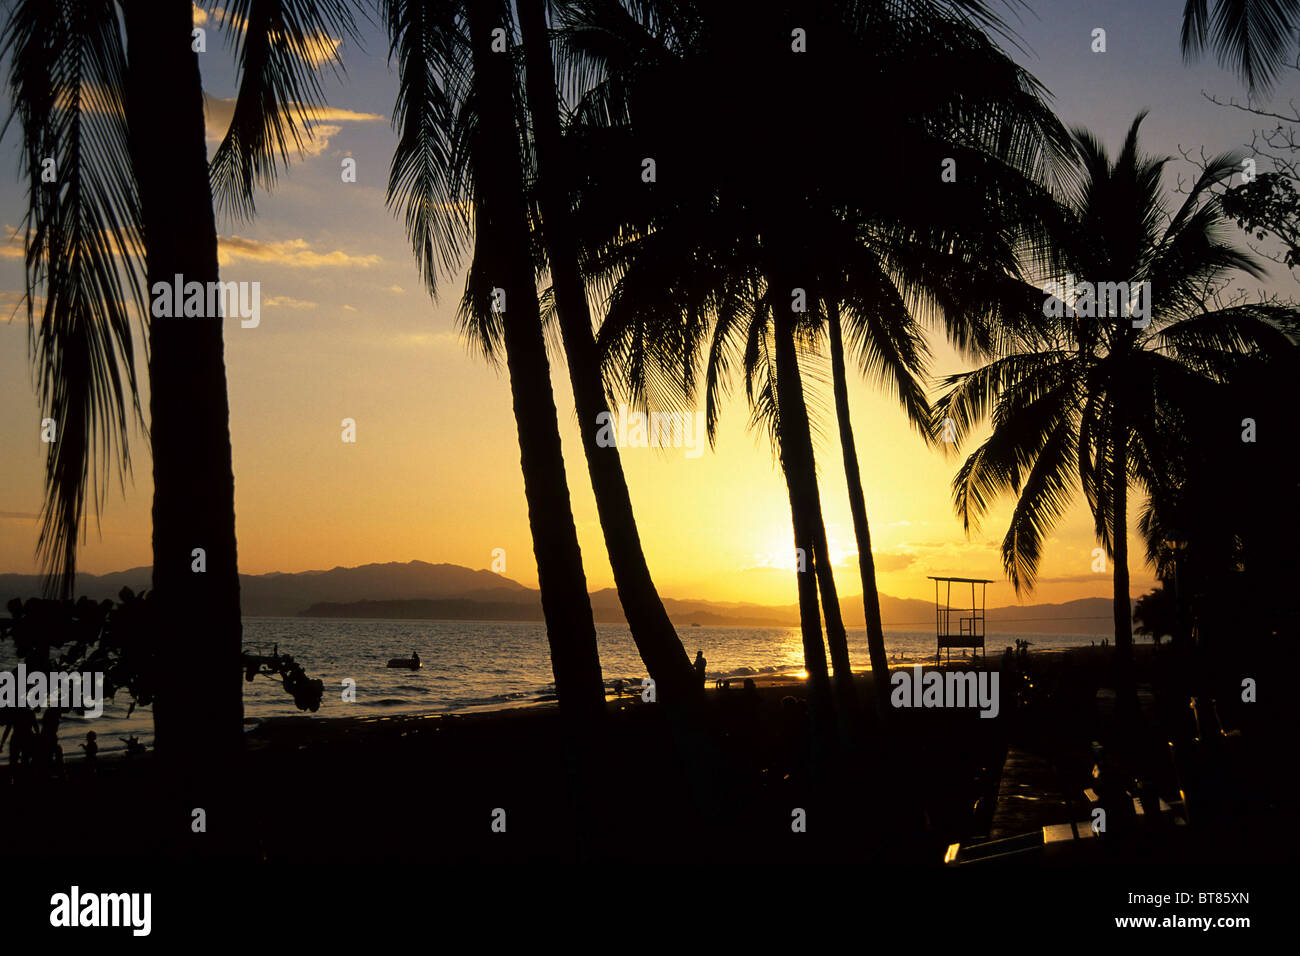 Beach with palm trees, sunset on the Pacific Coast in Puntarenas, Peninsula de Nicoya at back, Costa Rica, Pacific Ocean Stock Photo